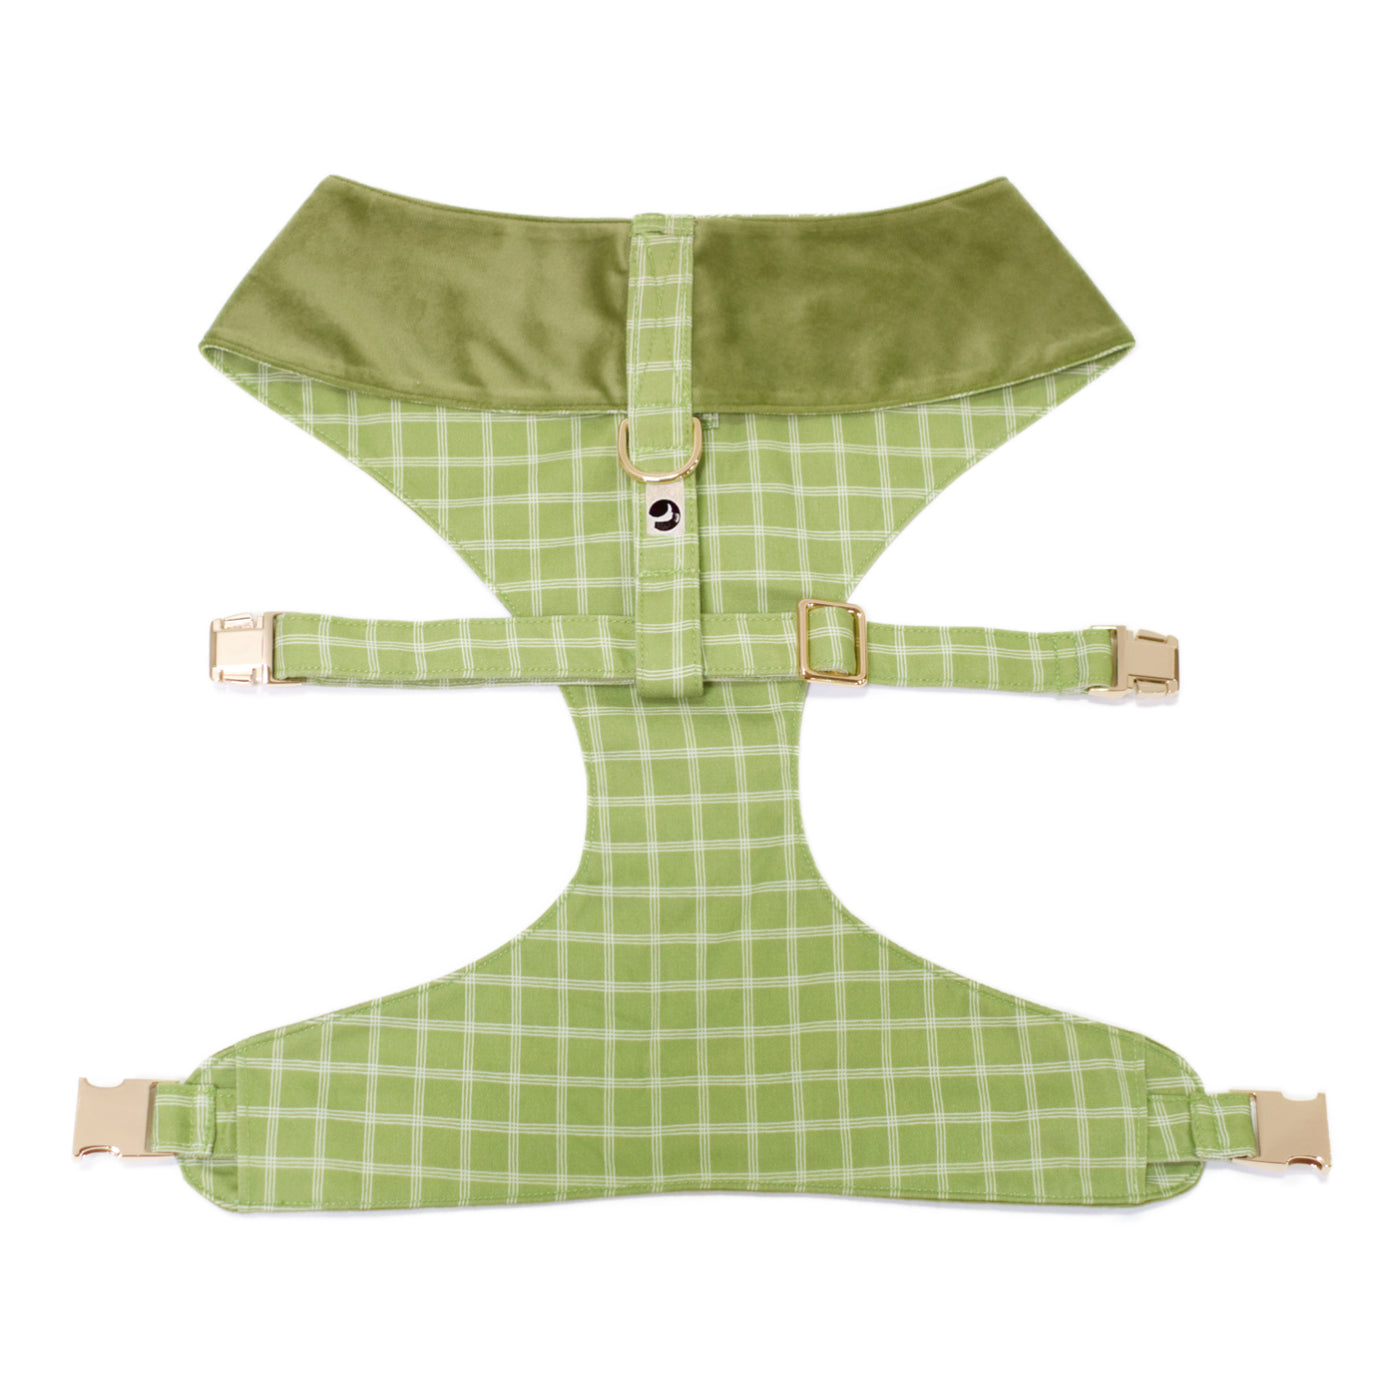 Top/back view of reversible dog harness with moss green velvet and spring green triple windowpane plaid